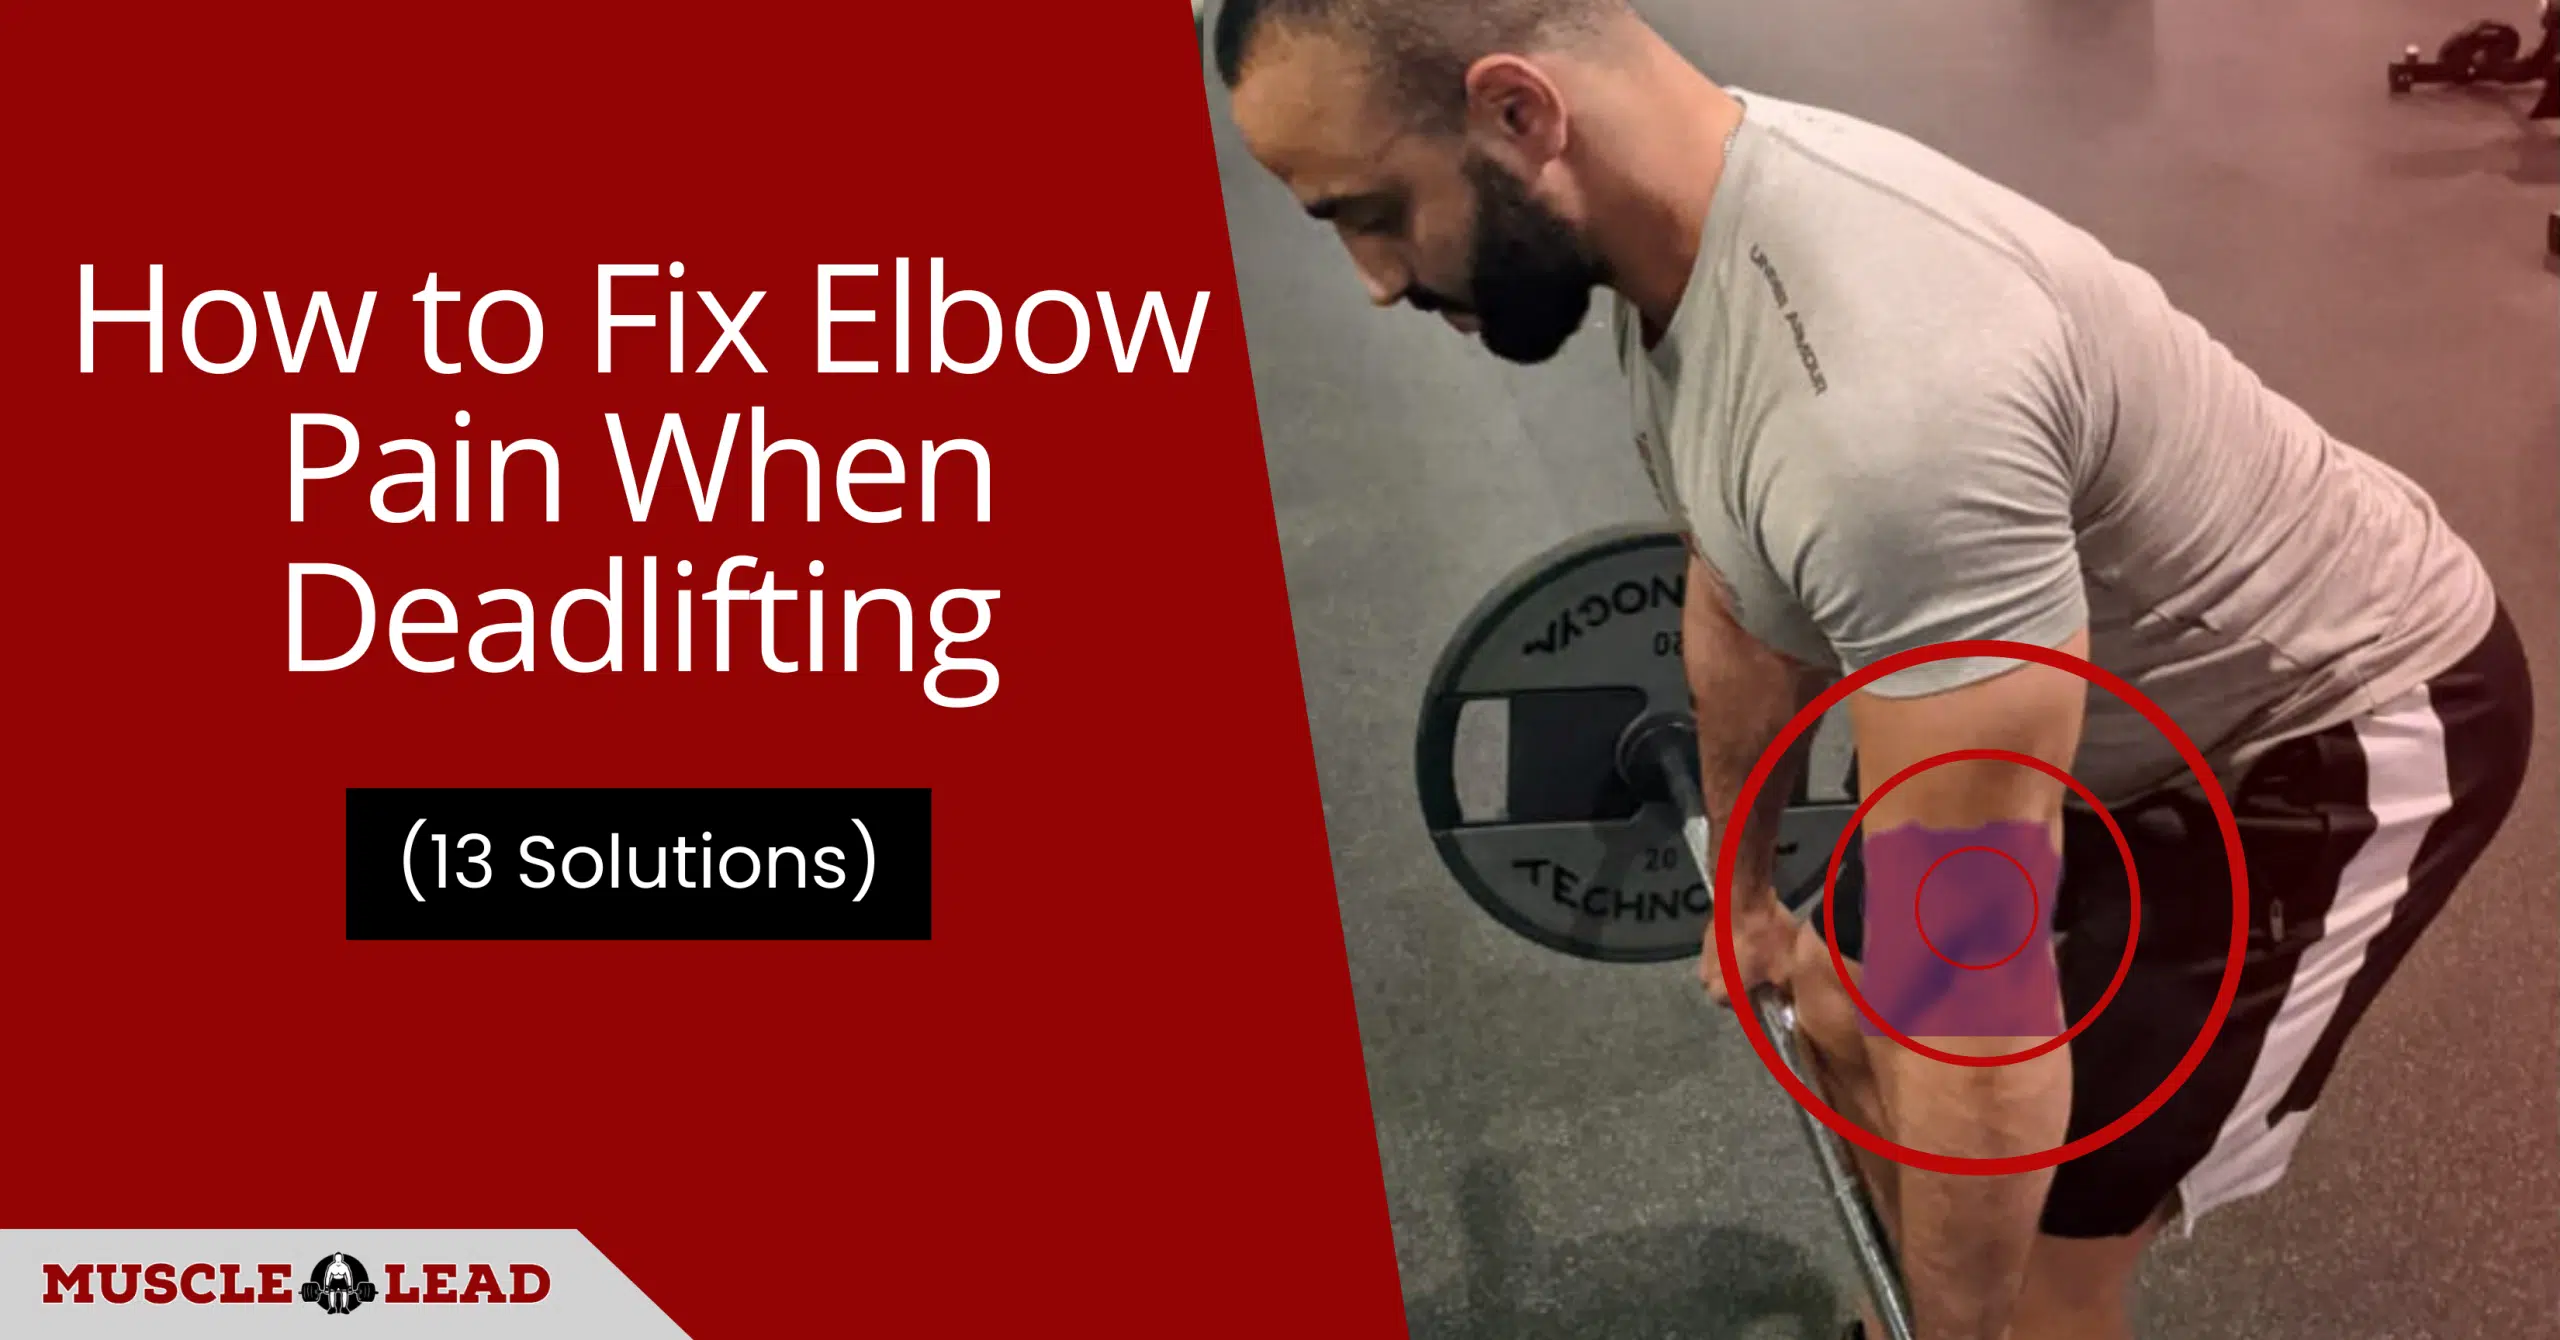 How to Fix Elbow Pain When Deadlifting 13 Solutions 